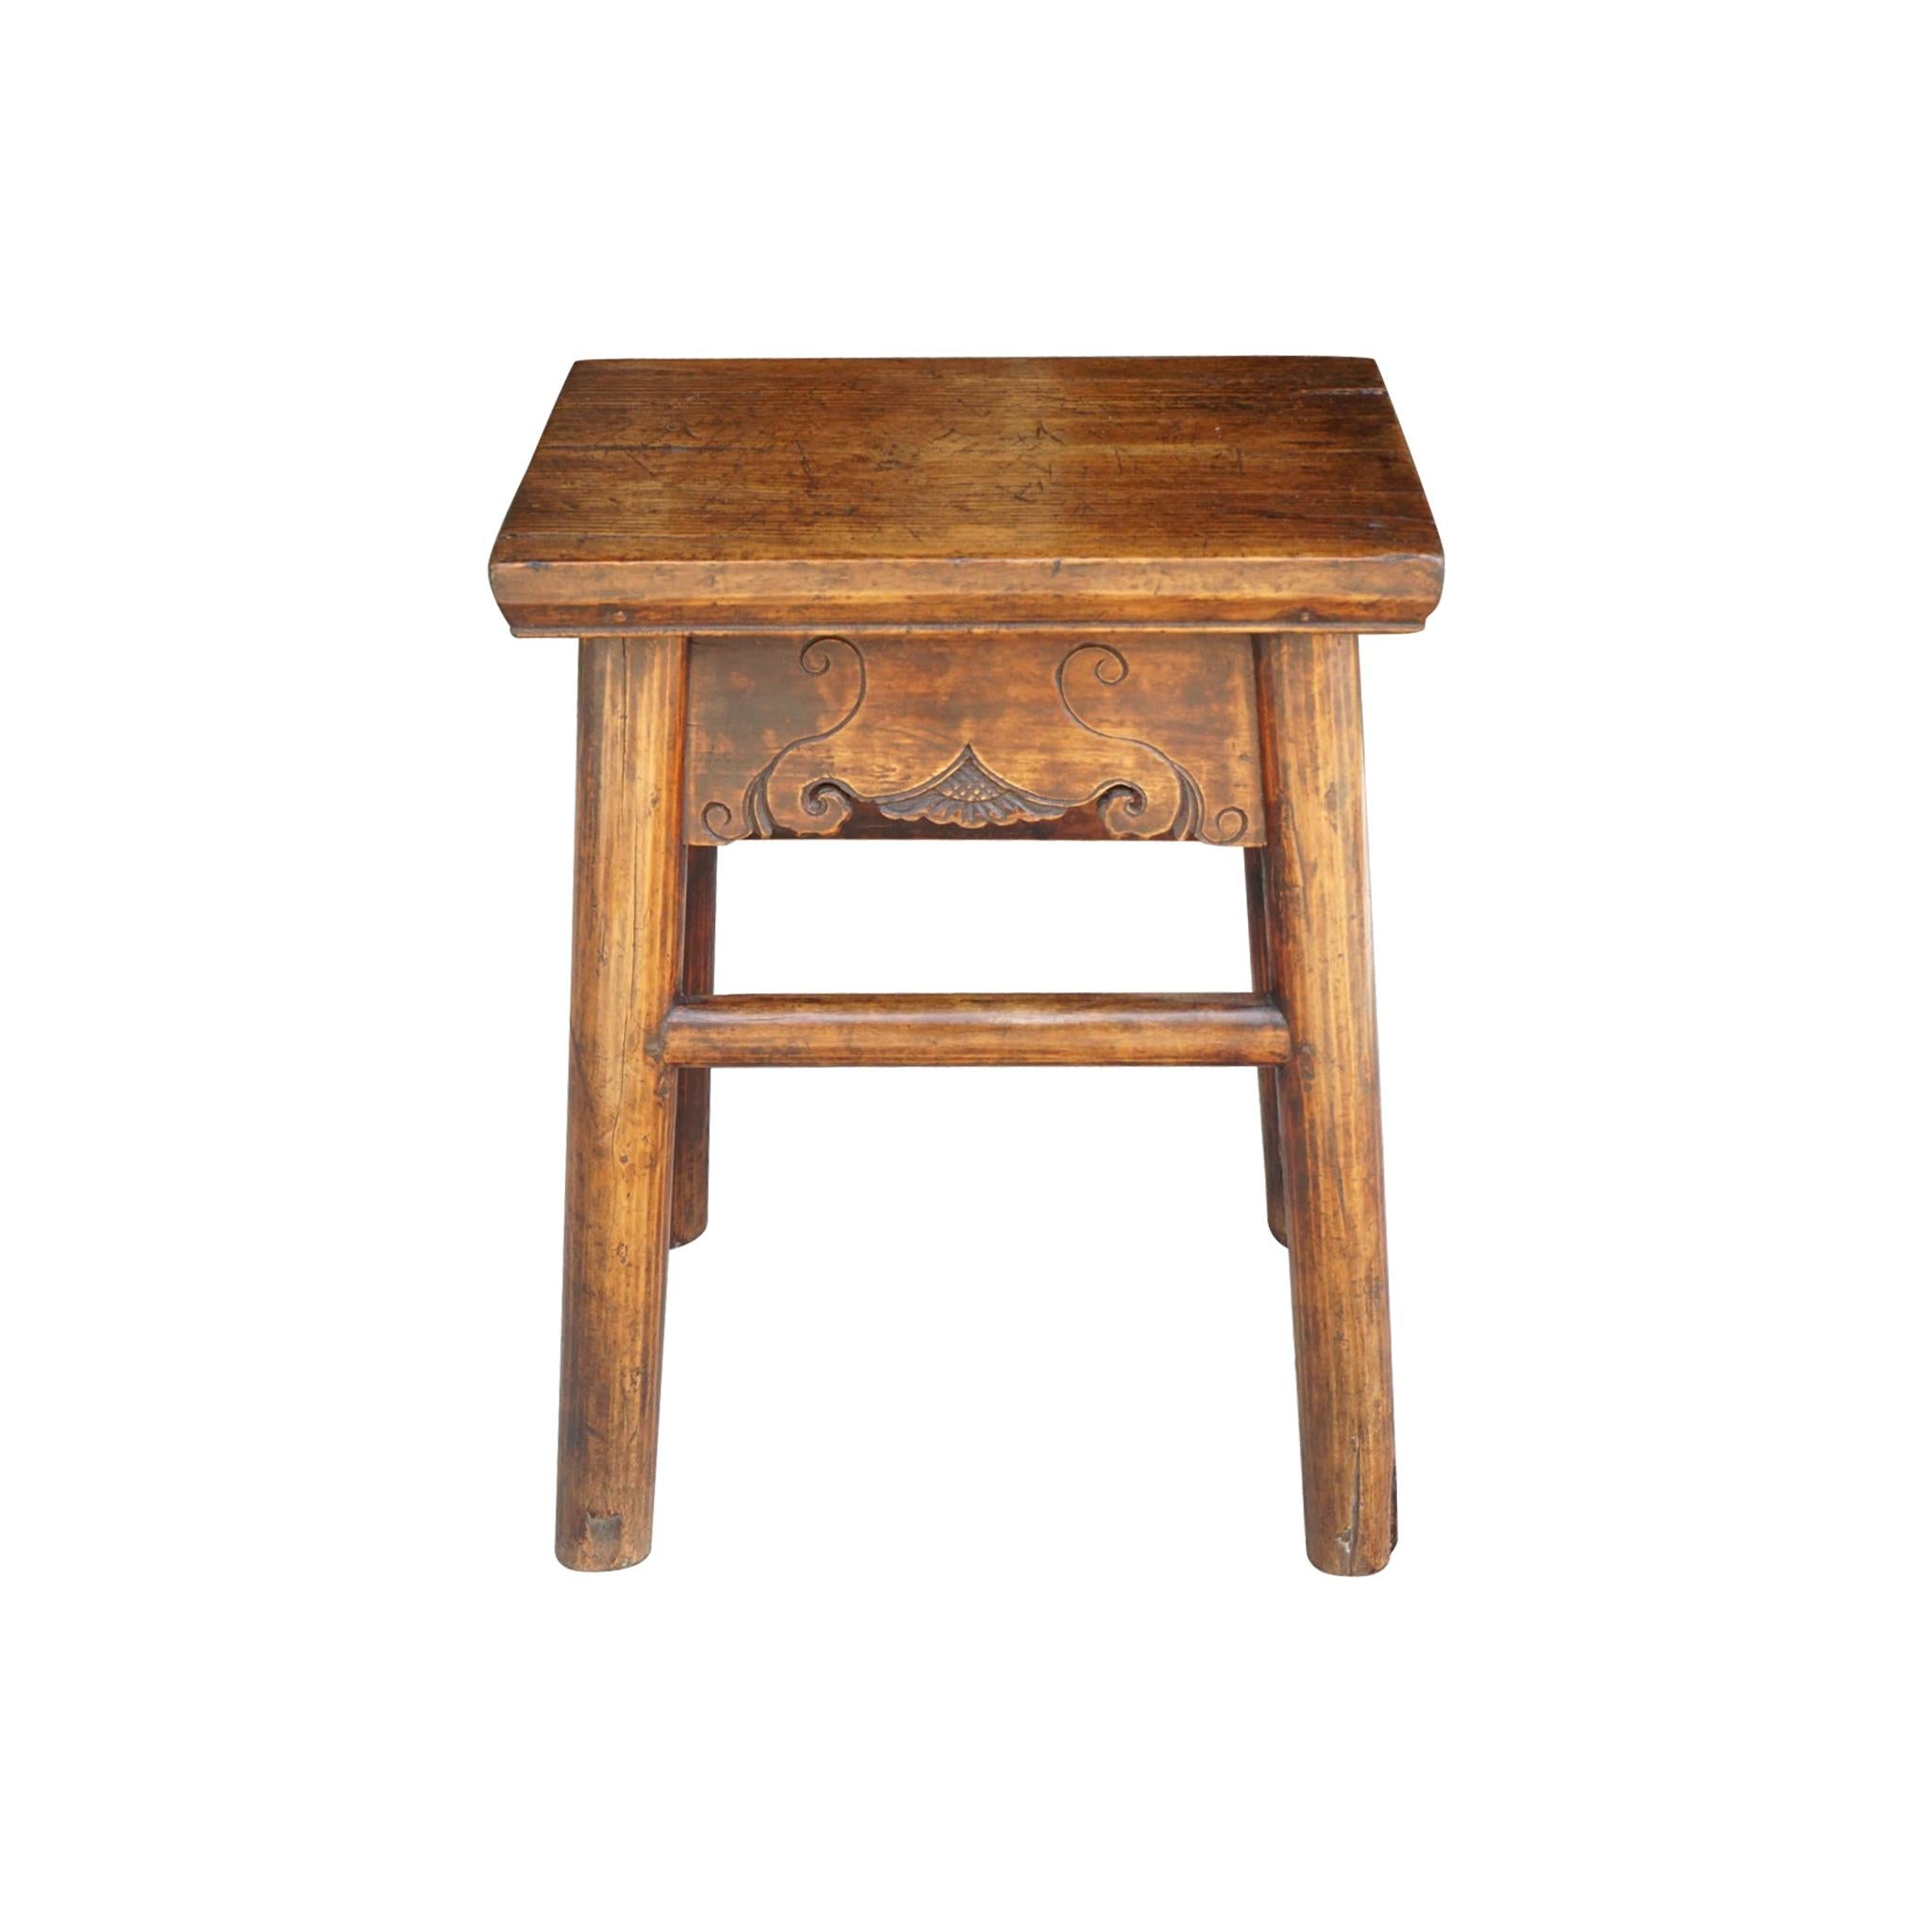 Early 19th Century Chinese Elm Stool or Low Table